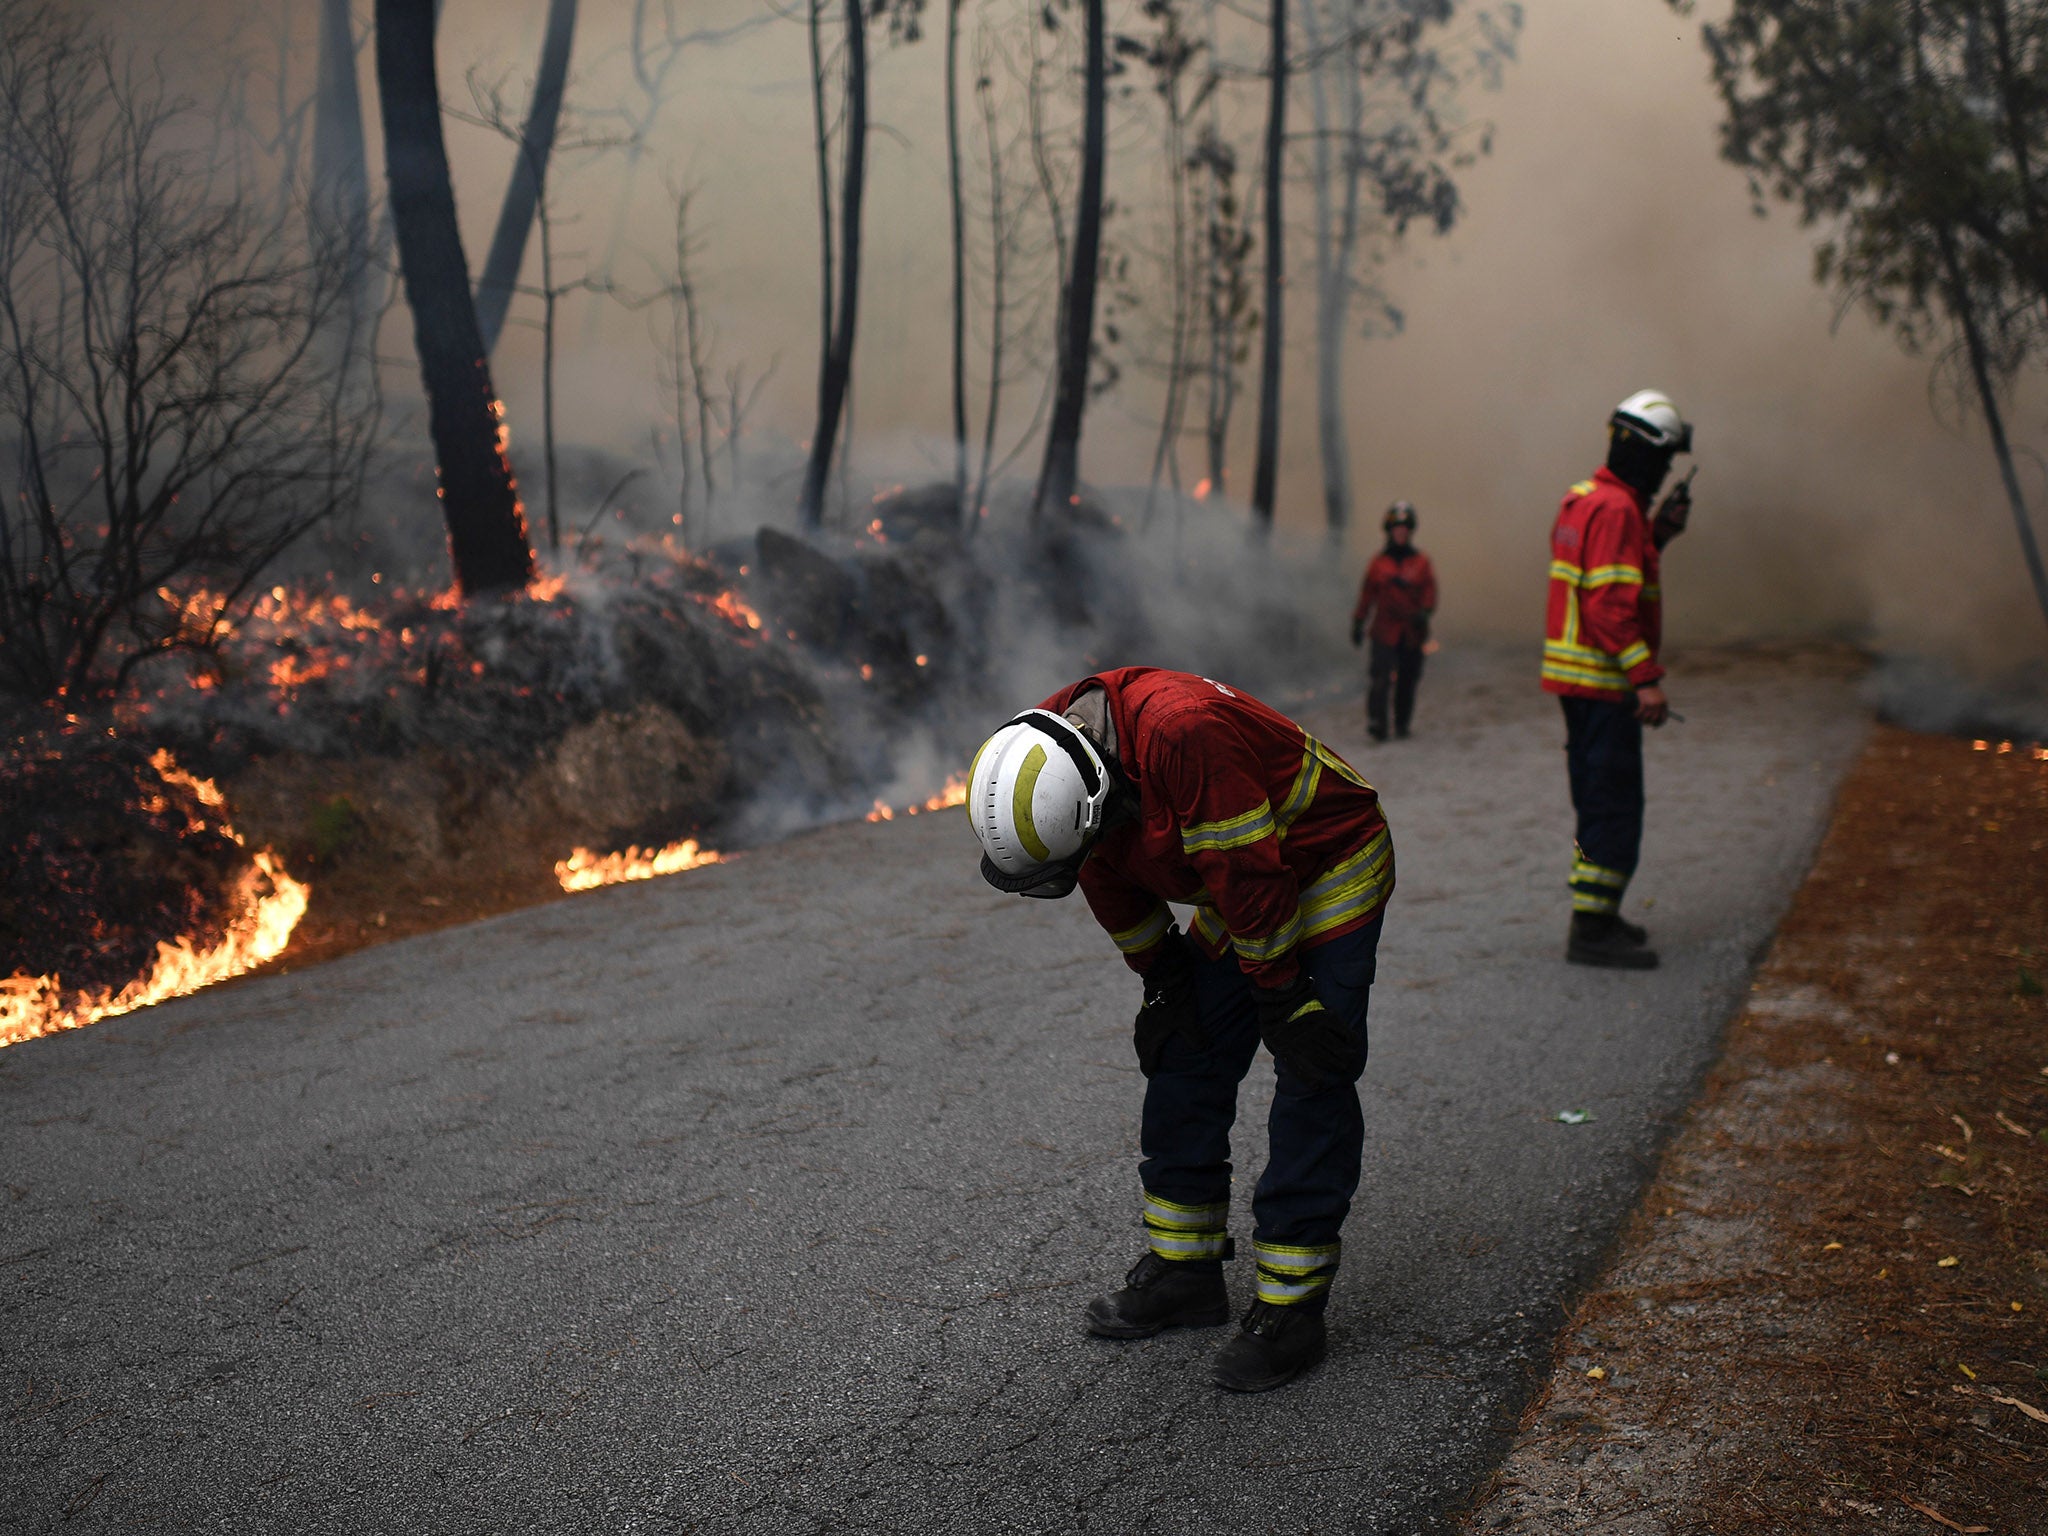 Portugal’s civil protection service said more than 4,000 firefighters were attending to 150 separate blazes which had appeared